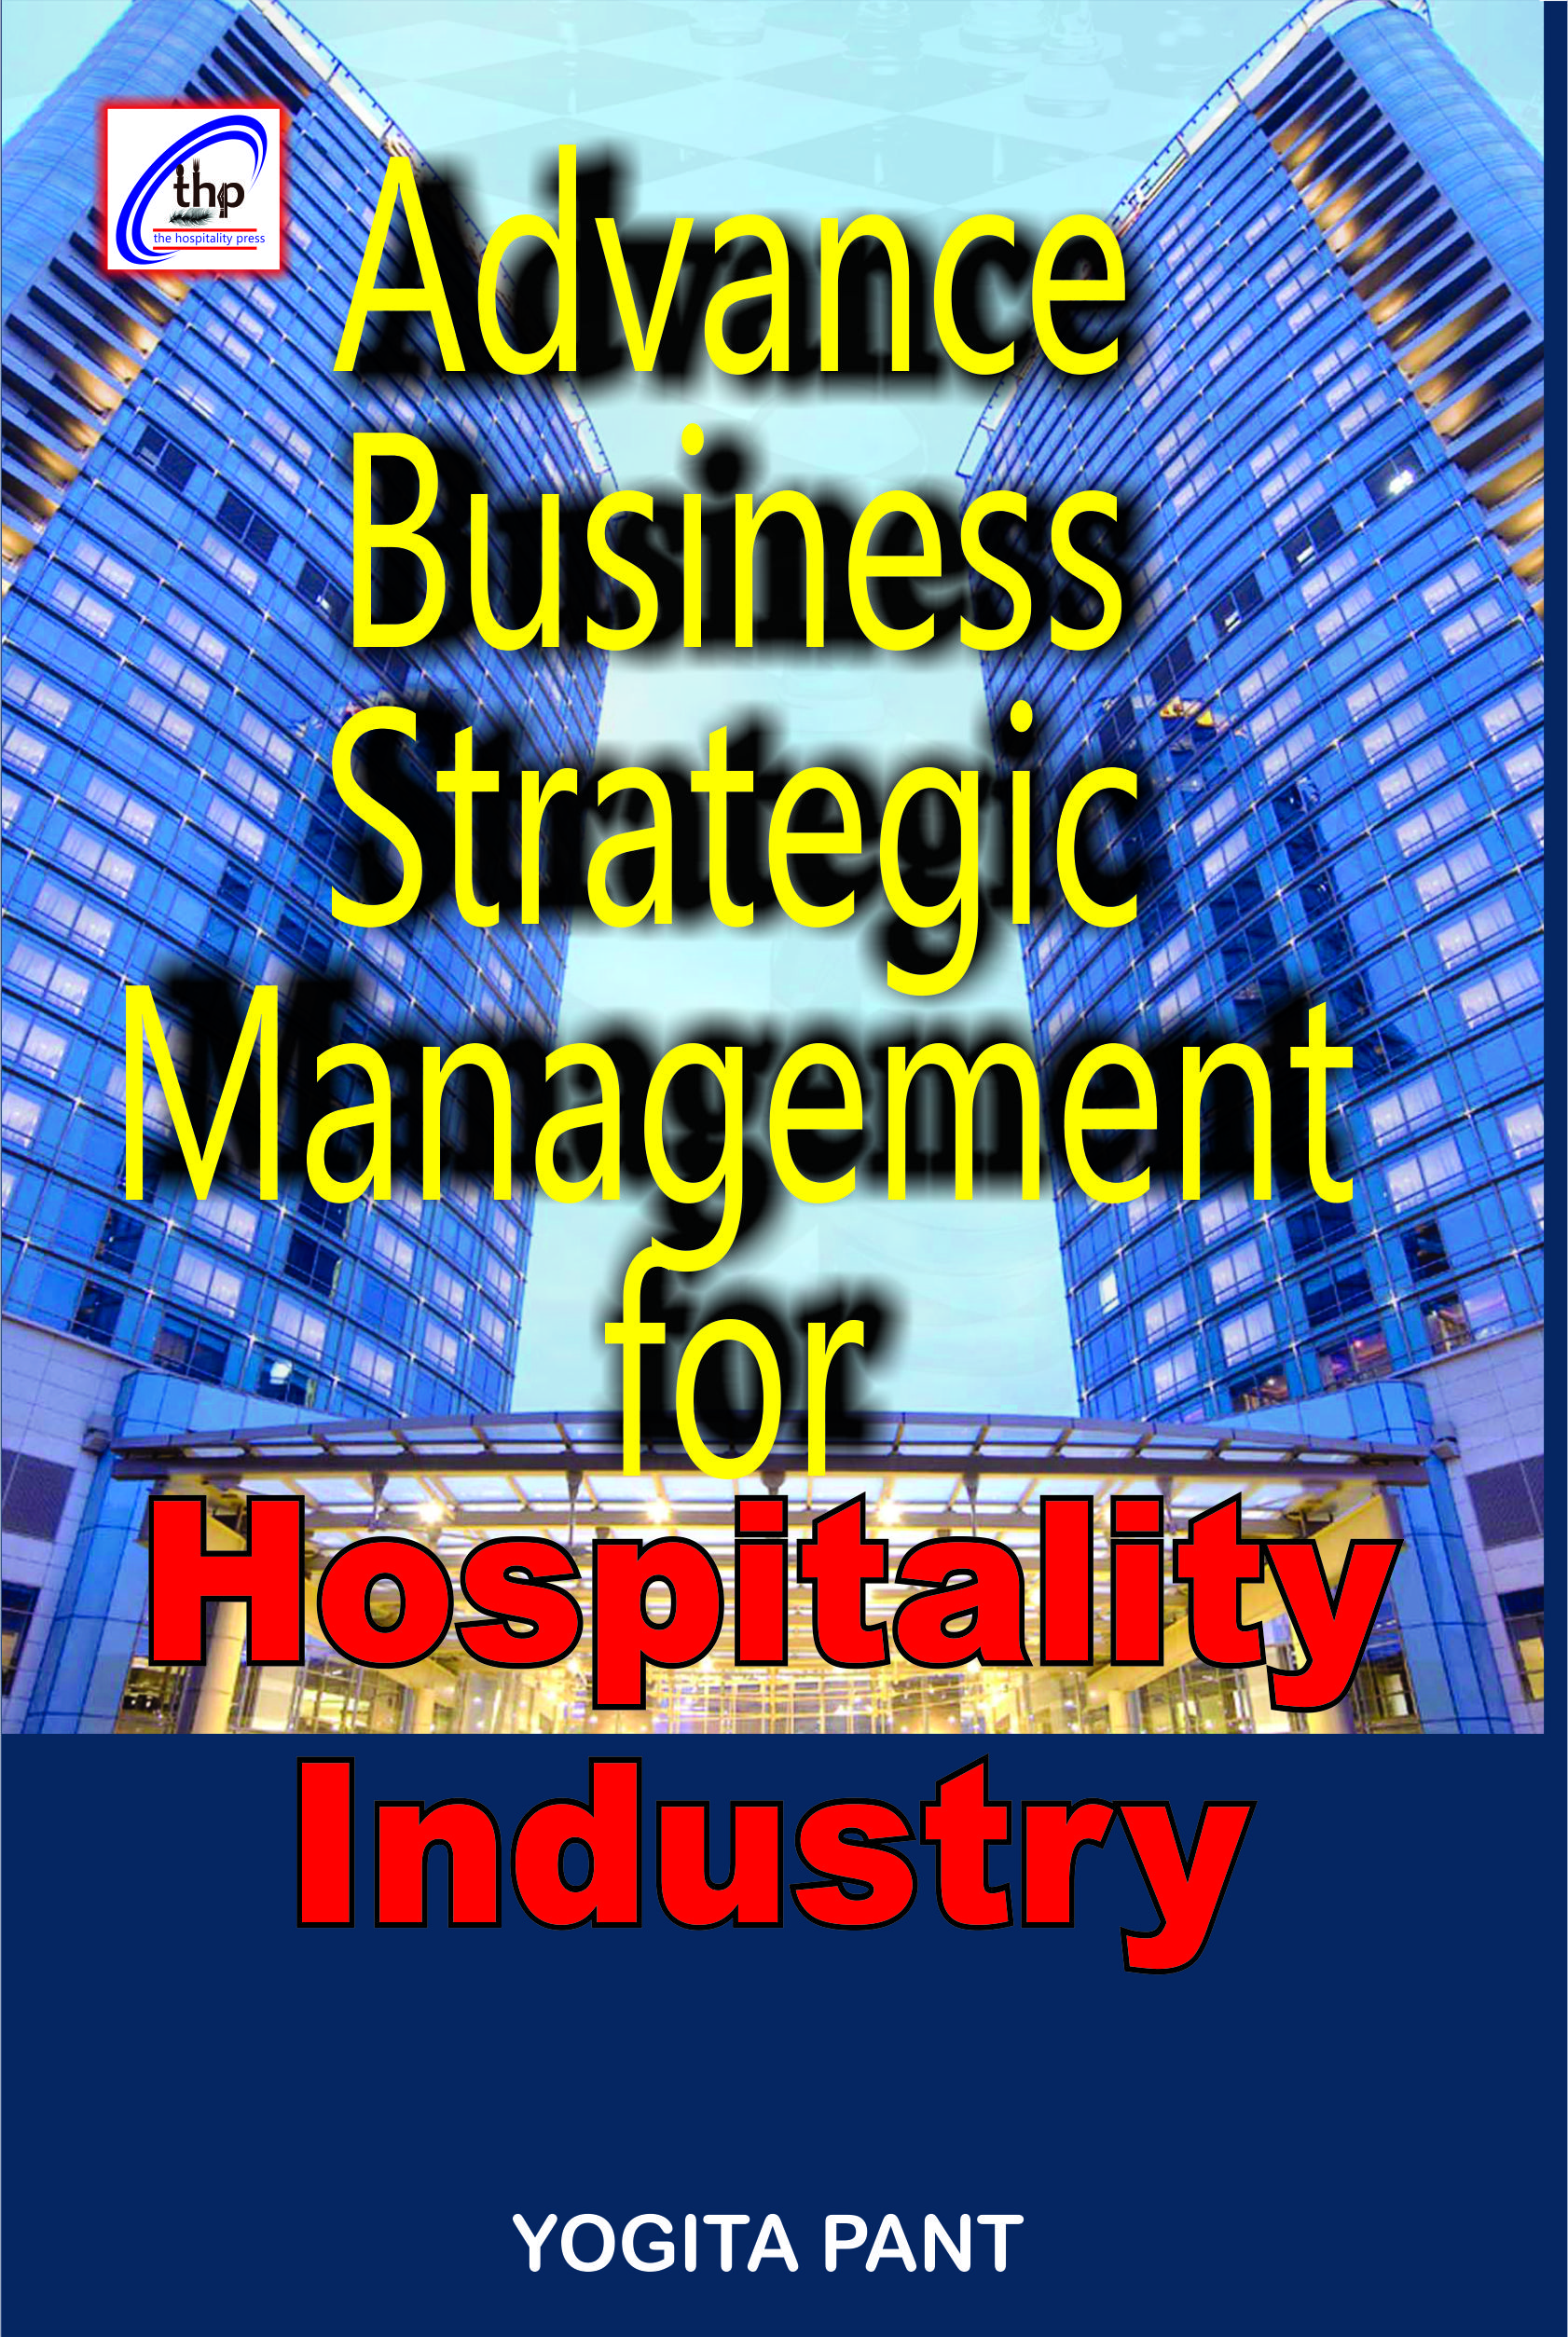 Advance Business Strategic Management For Hospitality Industry